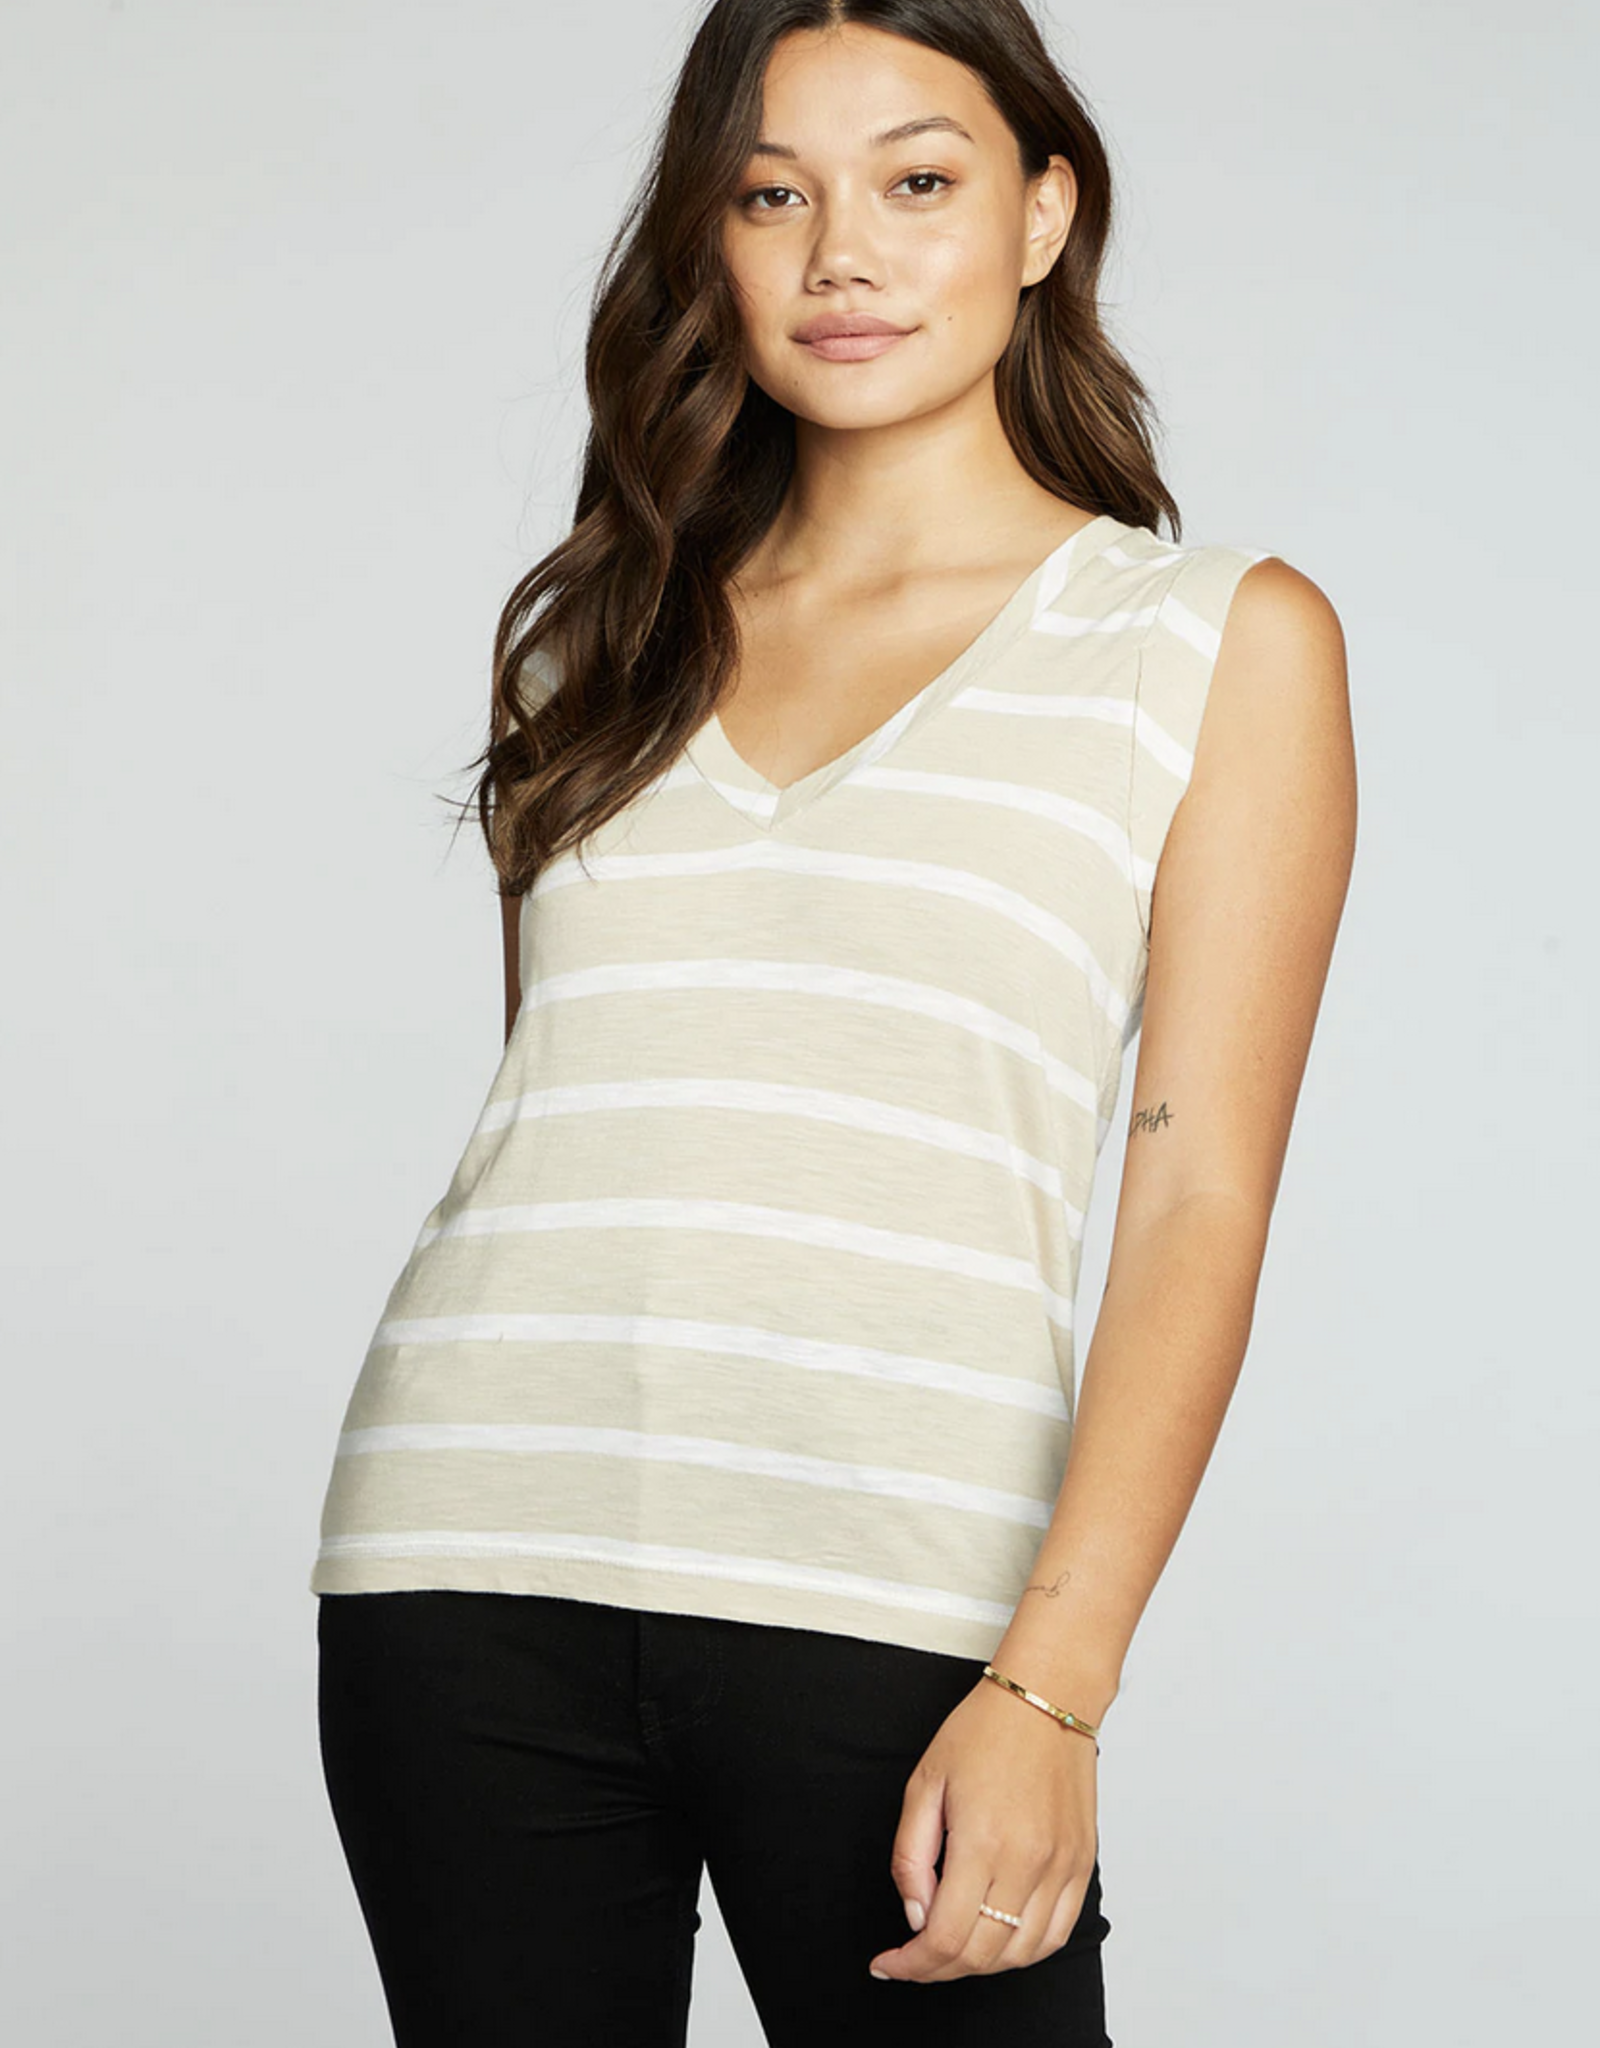 Chaser Stripe Muscle Tank